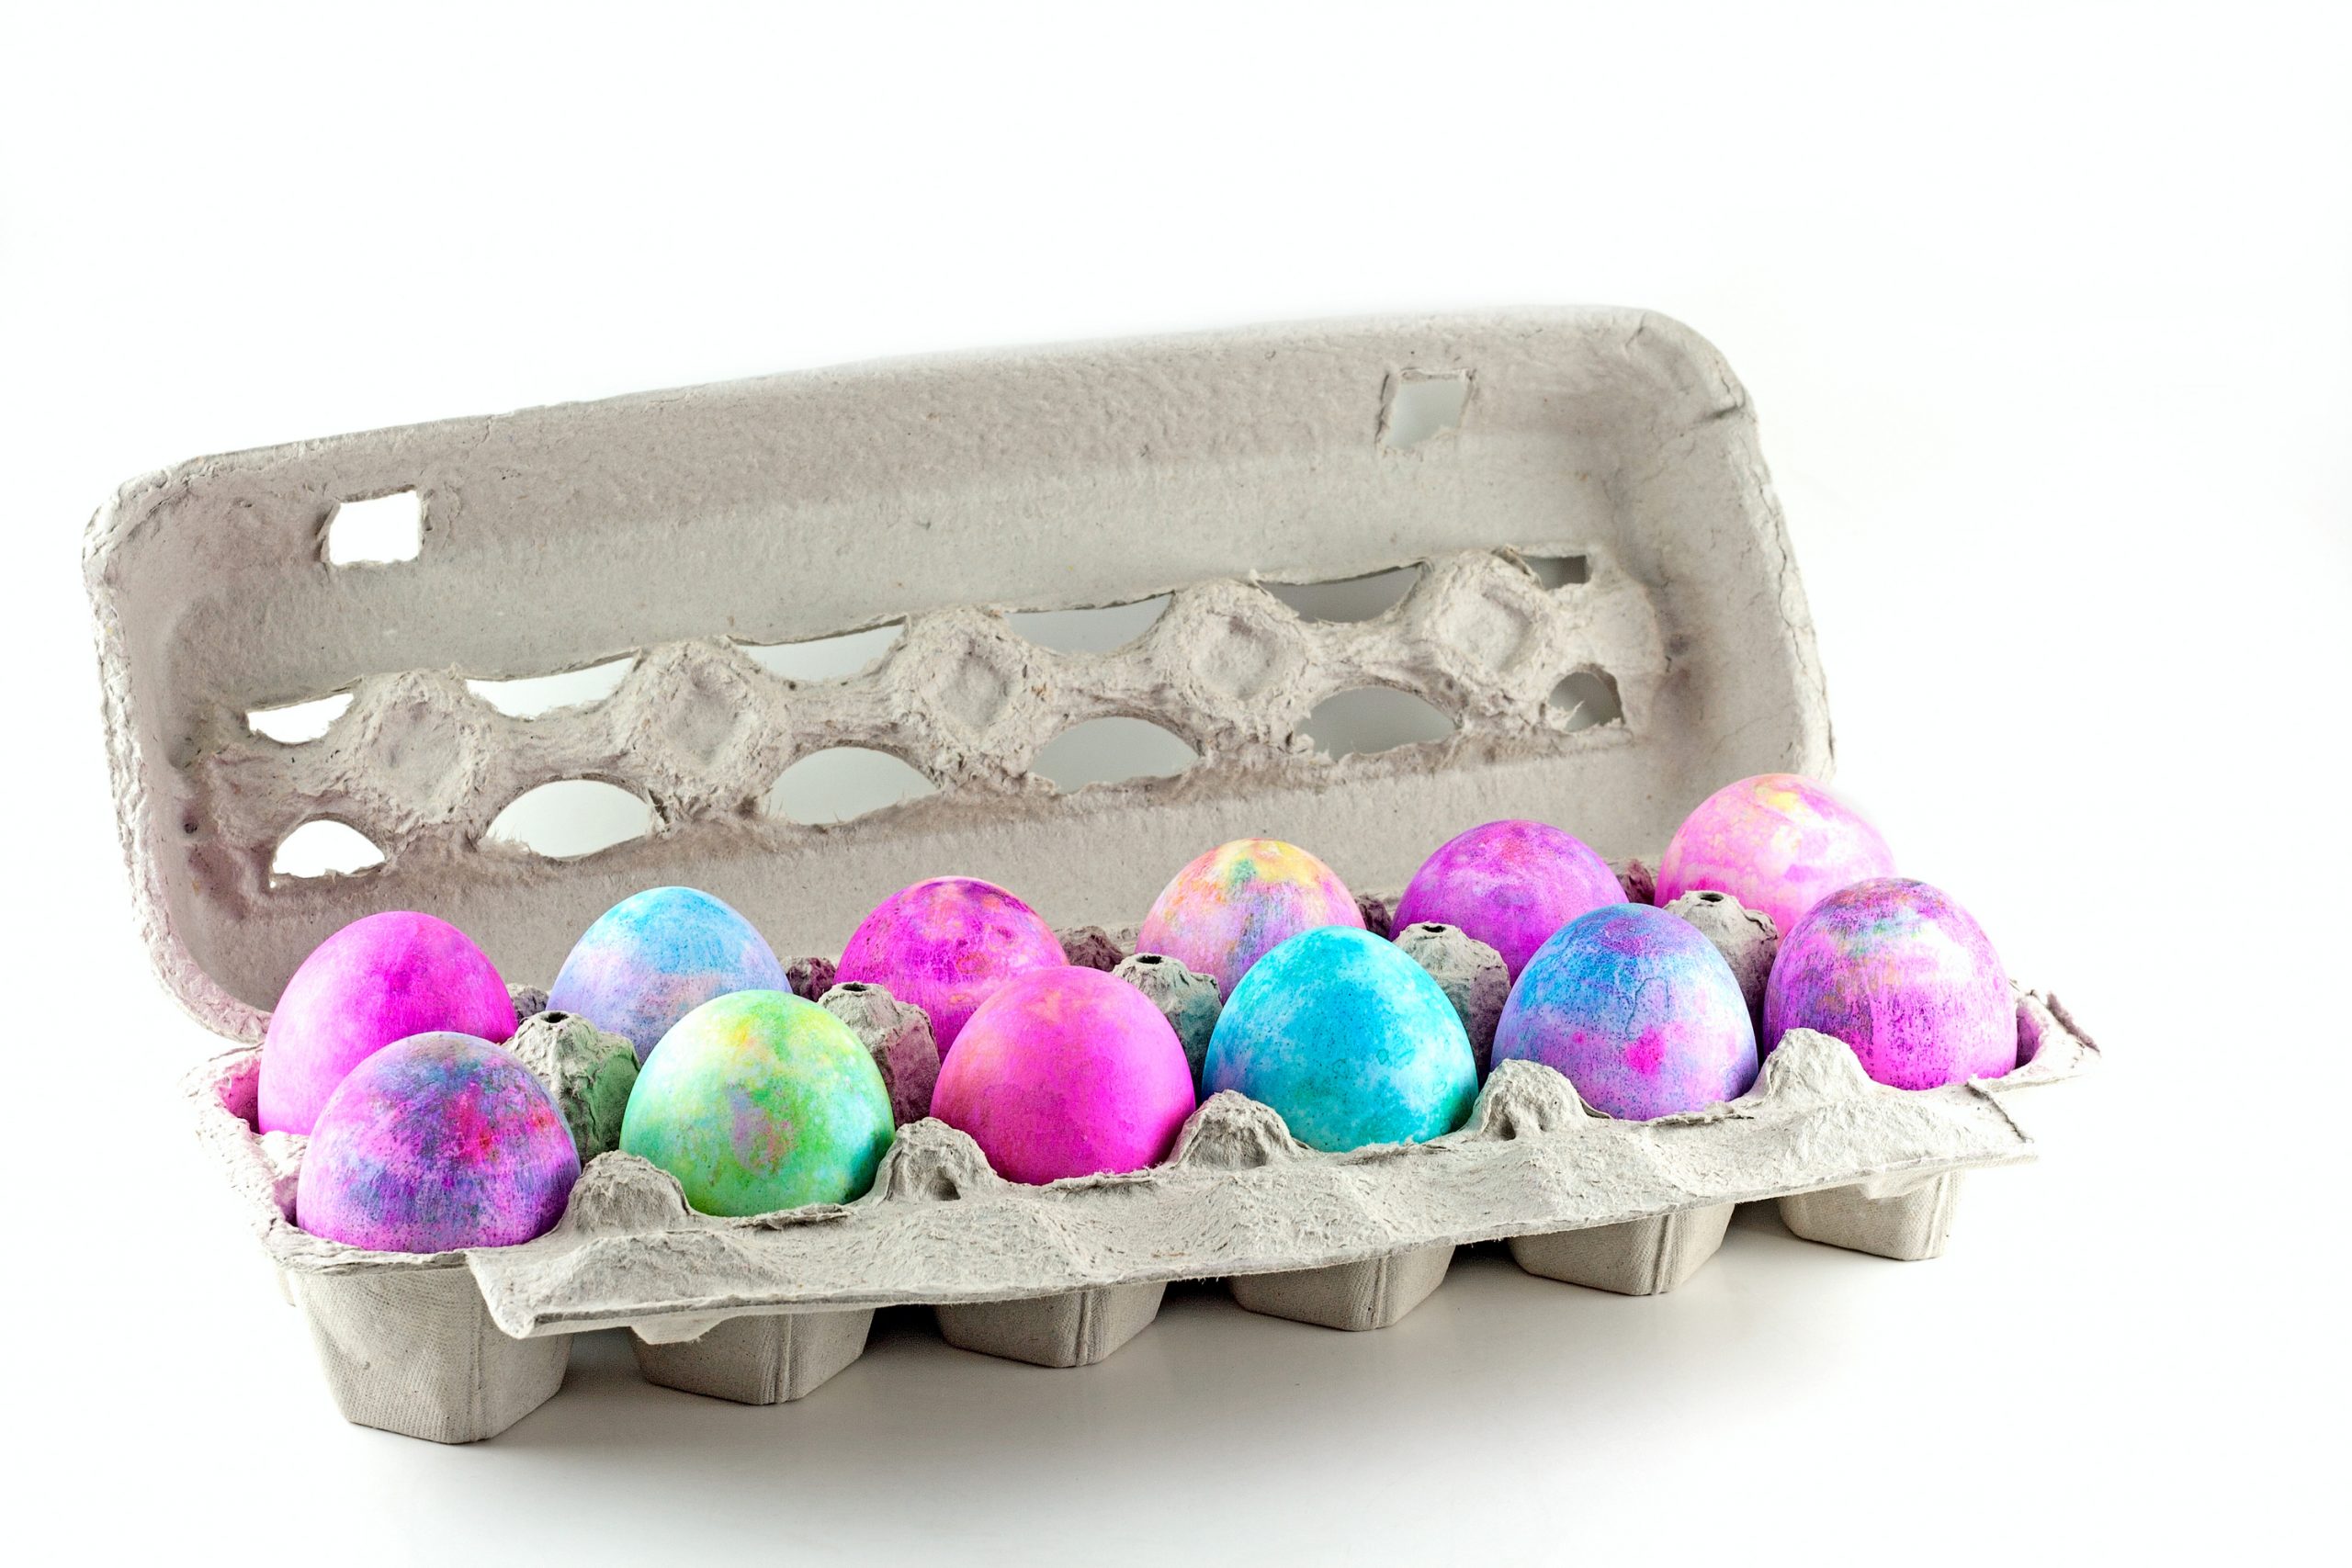 A carton full of shaving cream Easter eggs. The eggs have a multi-colored look.